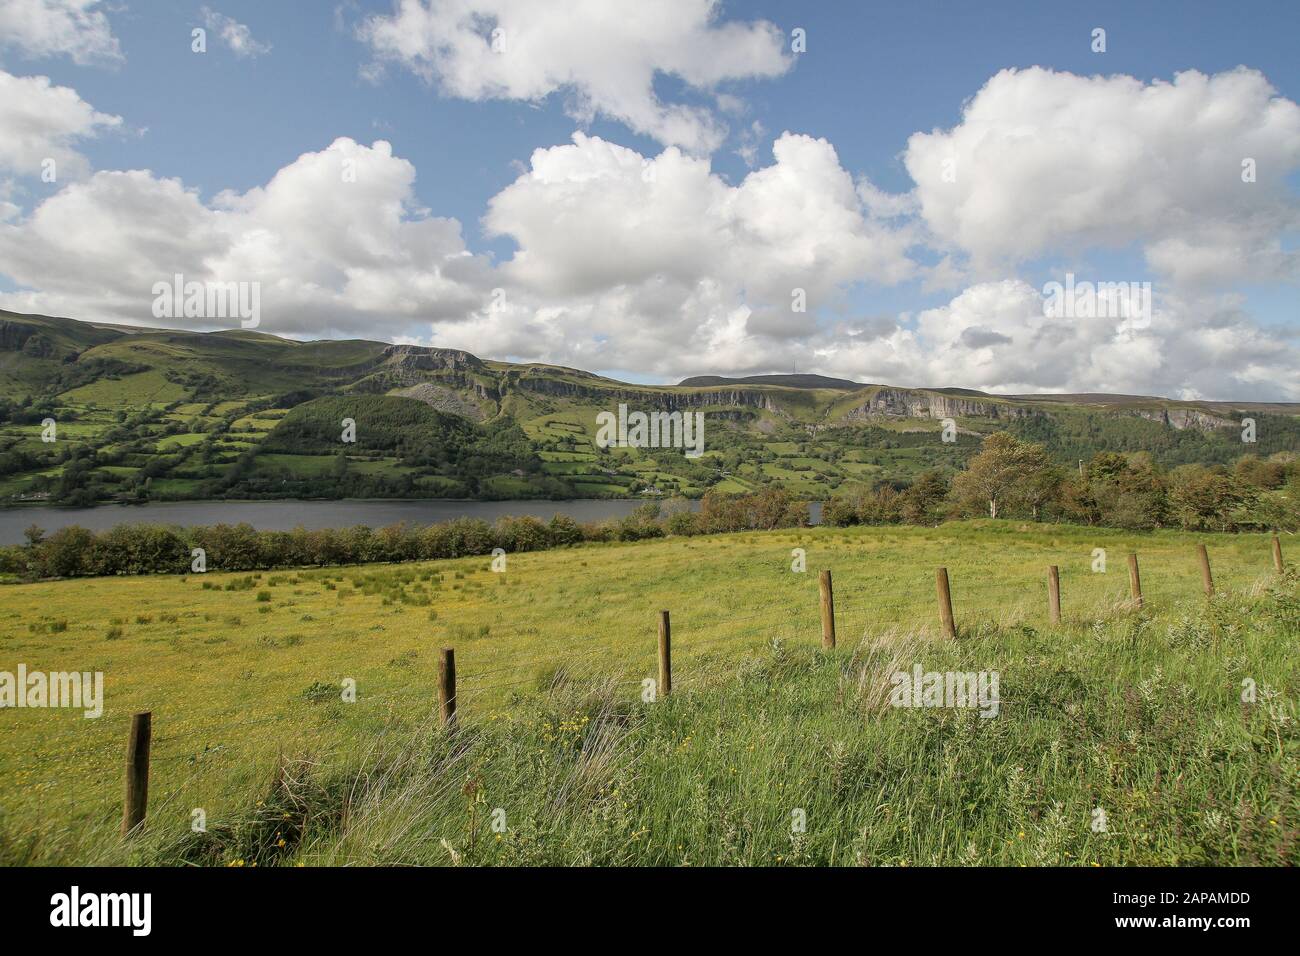 Summer with white clouds and blue sky in rural Ireland with a view beyond the wire fence and green fields across Glencar Lake to the Dartry Mountains. Stock Photo